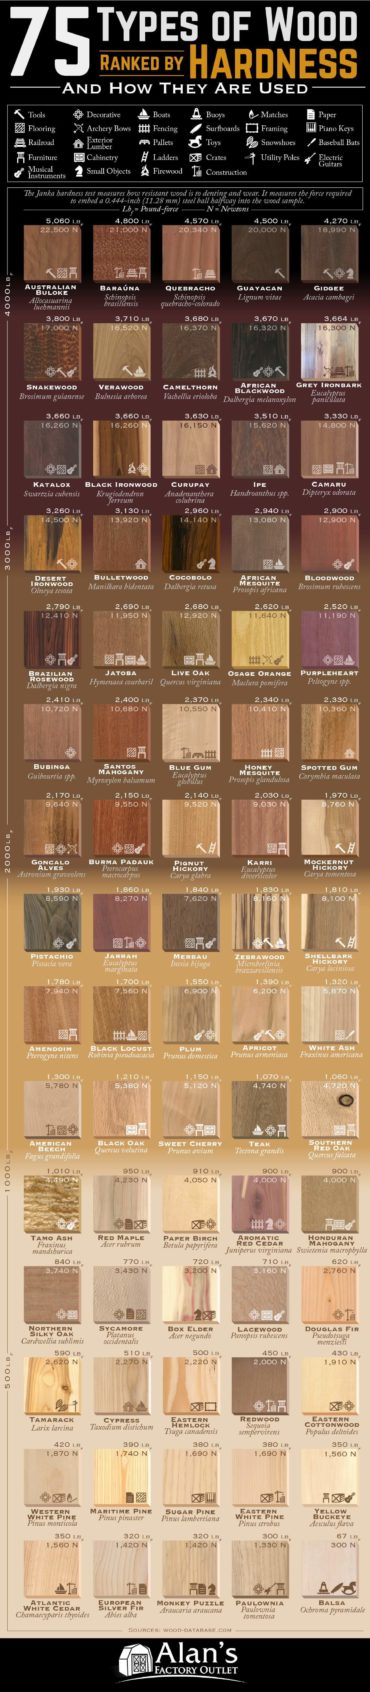 75 Types of Wood Ranked by Janka Hardness [+ Uses]